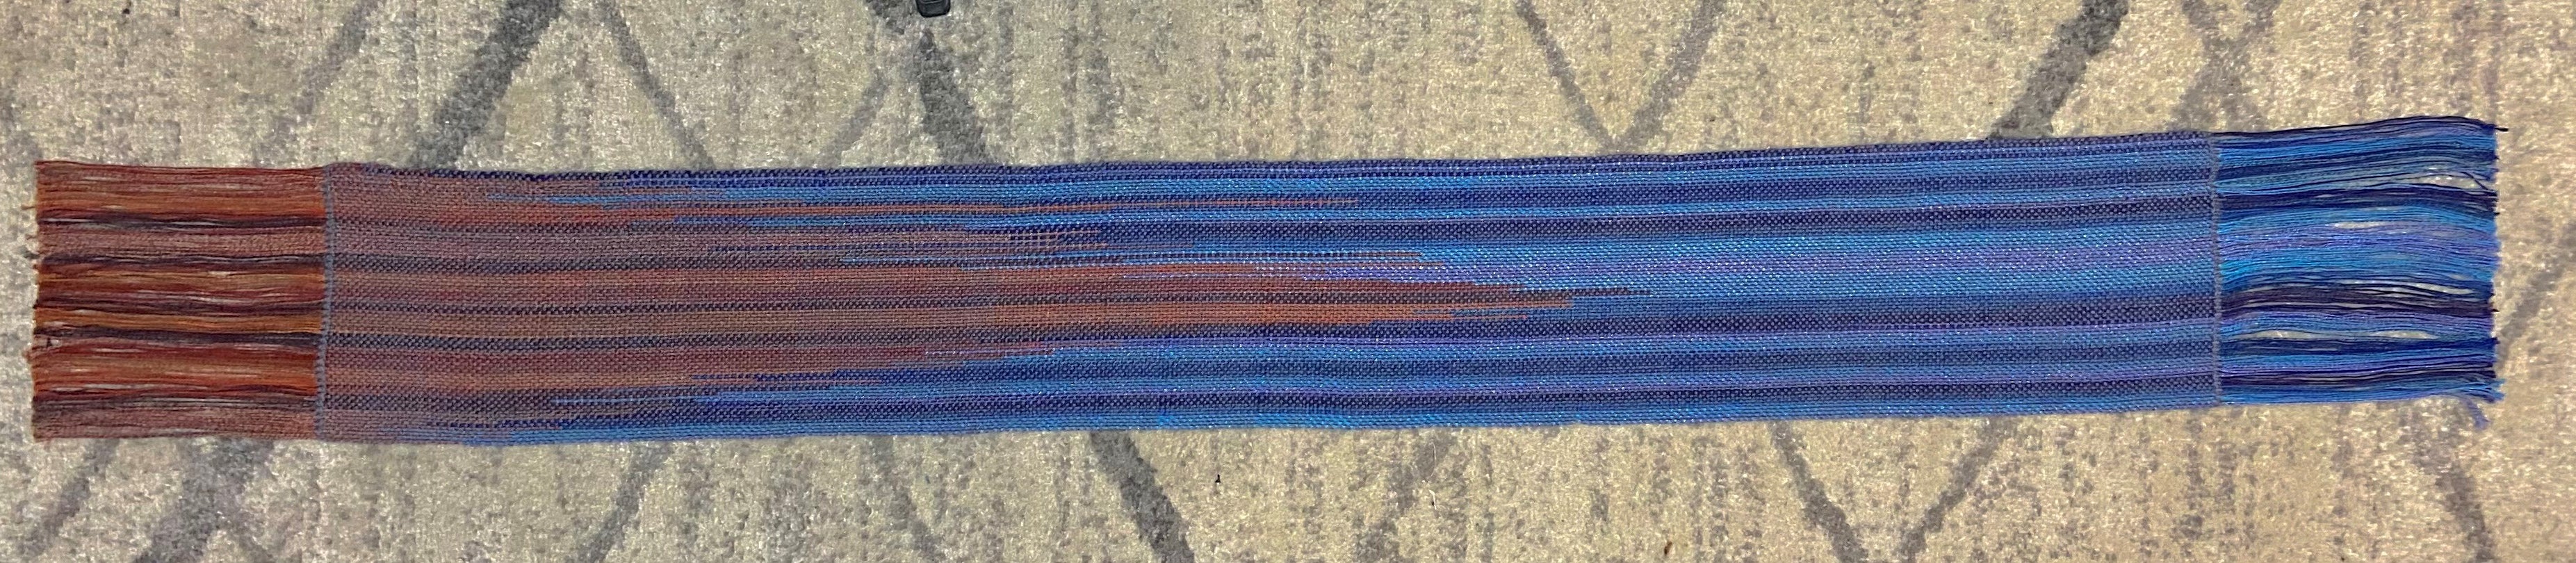 Four Hands Scarf laid out full length